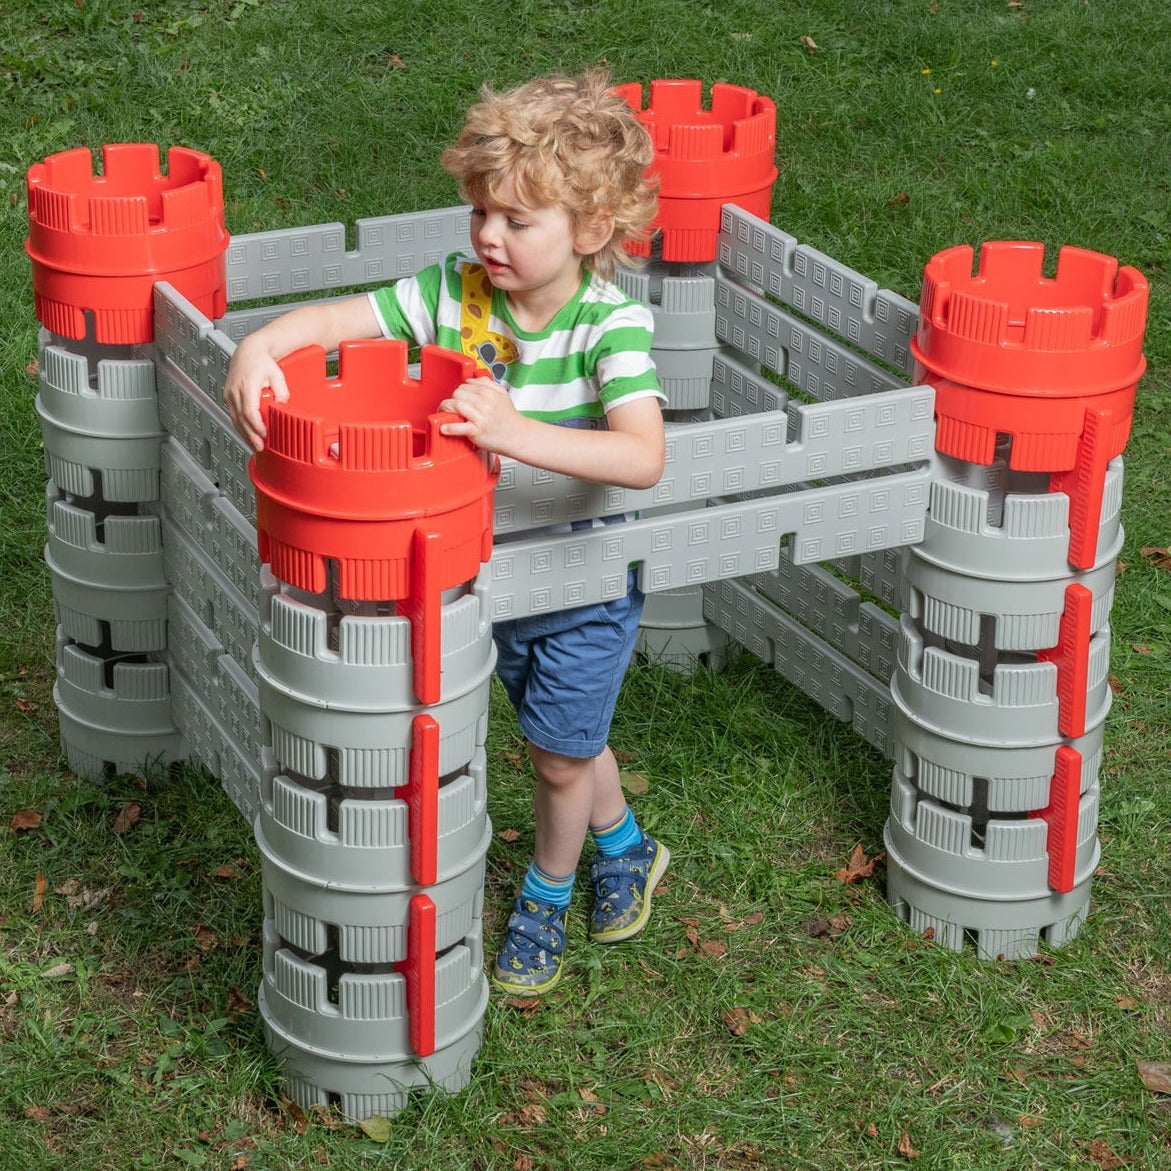 Constructa Castle, Unleash your child's imagination with the Constructa Castle construction set! This versatile kit allows young builders to create their very own castles and fortresses, providing endless hours of creative play and developmental benefits. Constructa CastleFeatures: 🏰 54 Bright Coloured Piec es: This Constructa Castle set includes a variety of components such as 16 turrets, 10 large connectors, 10 beams, 12 connectors, and 6 flexi connectors. The vivid colors are not only eye-catching but al